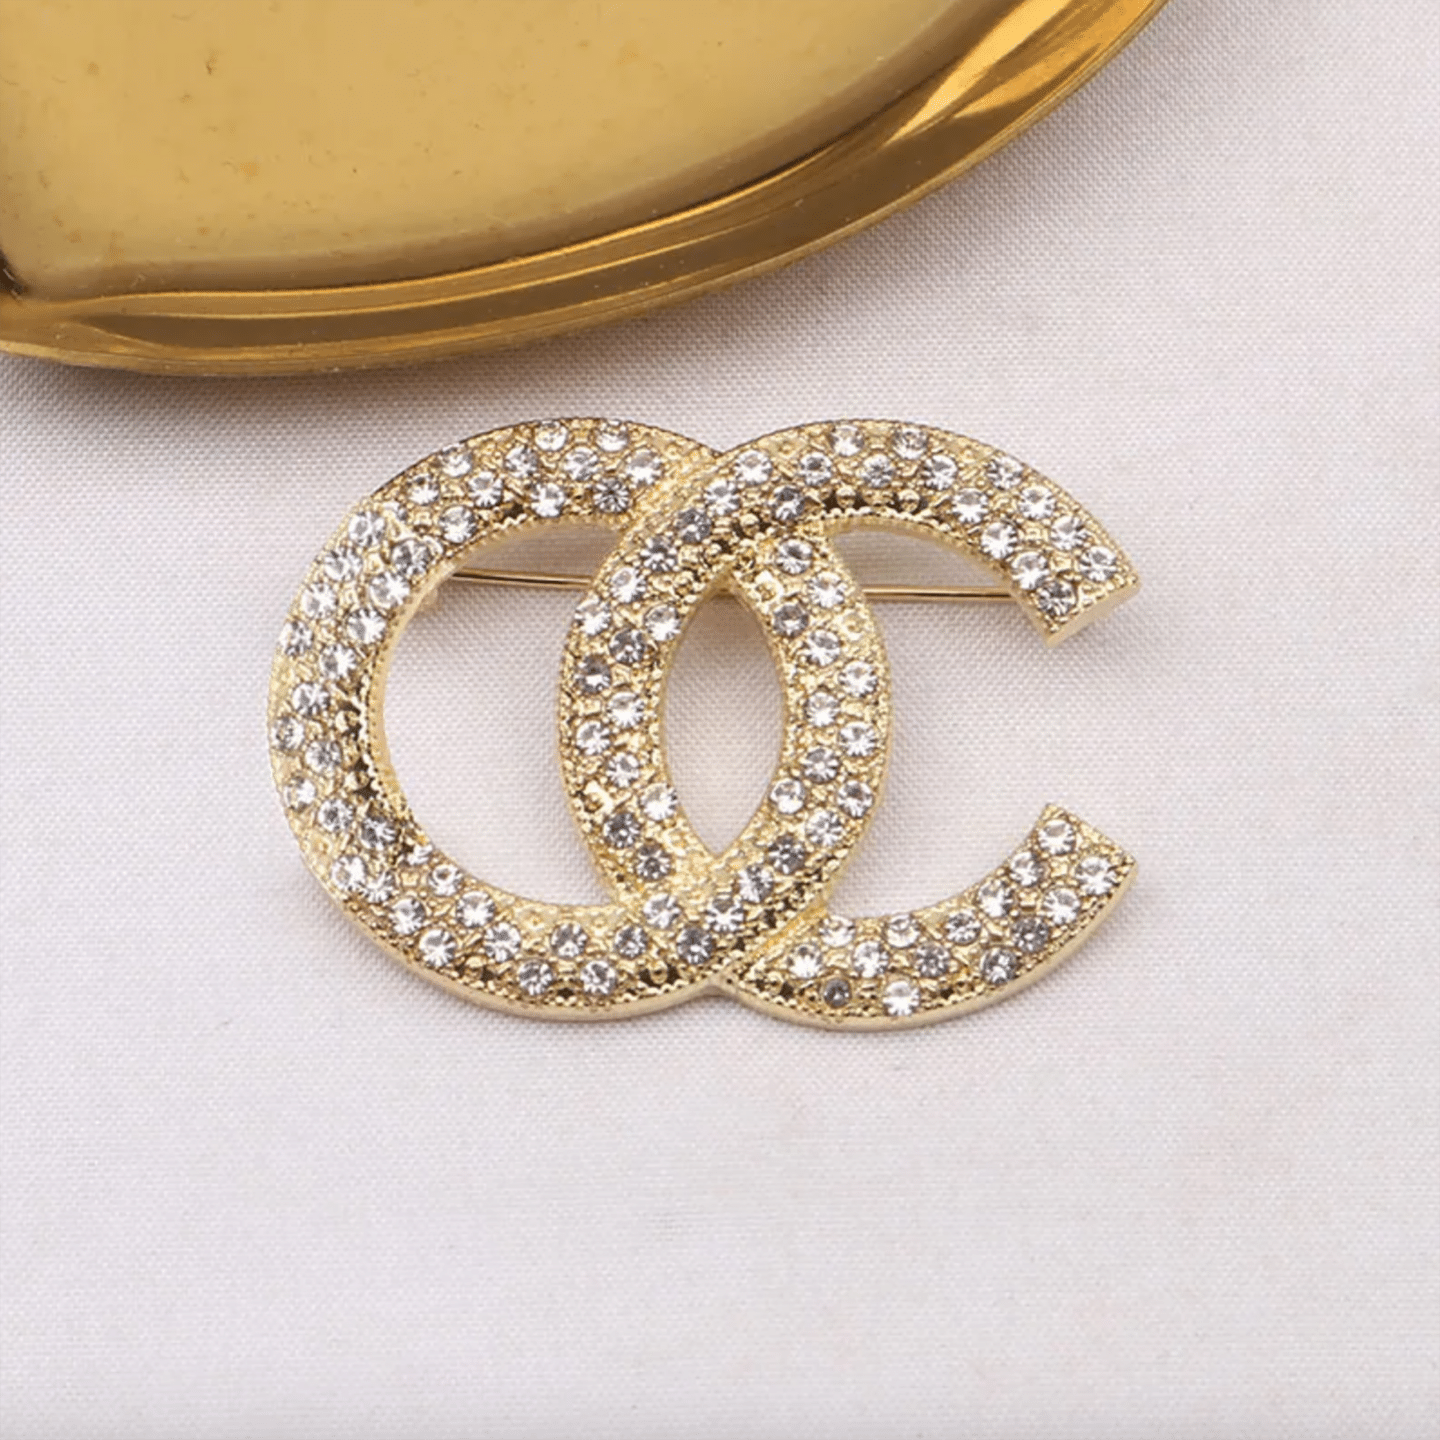 7 SUPER Luxe Chanel Brooch Dupes Under $100